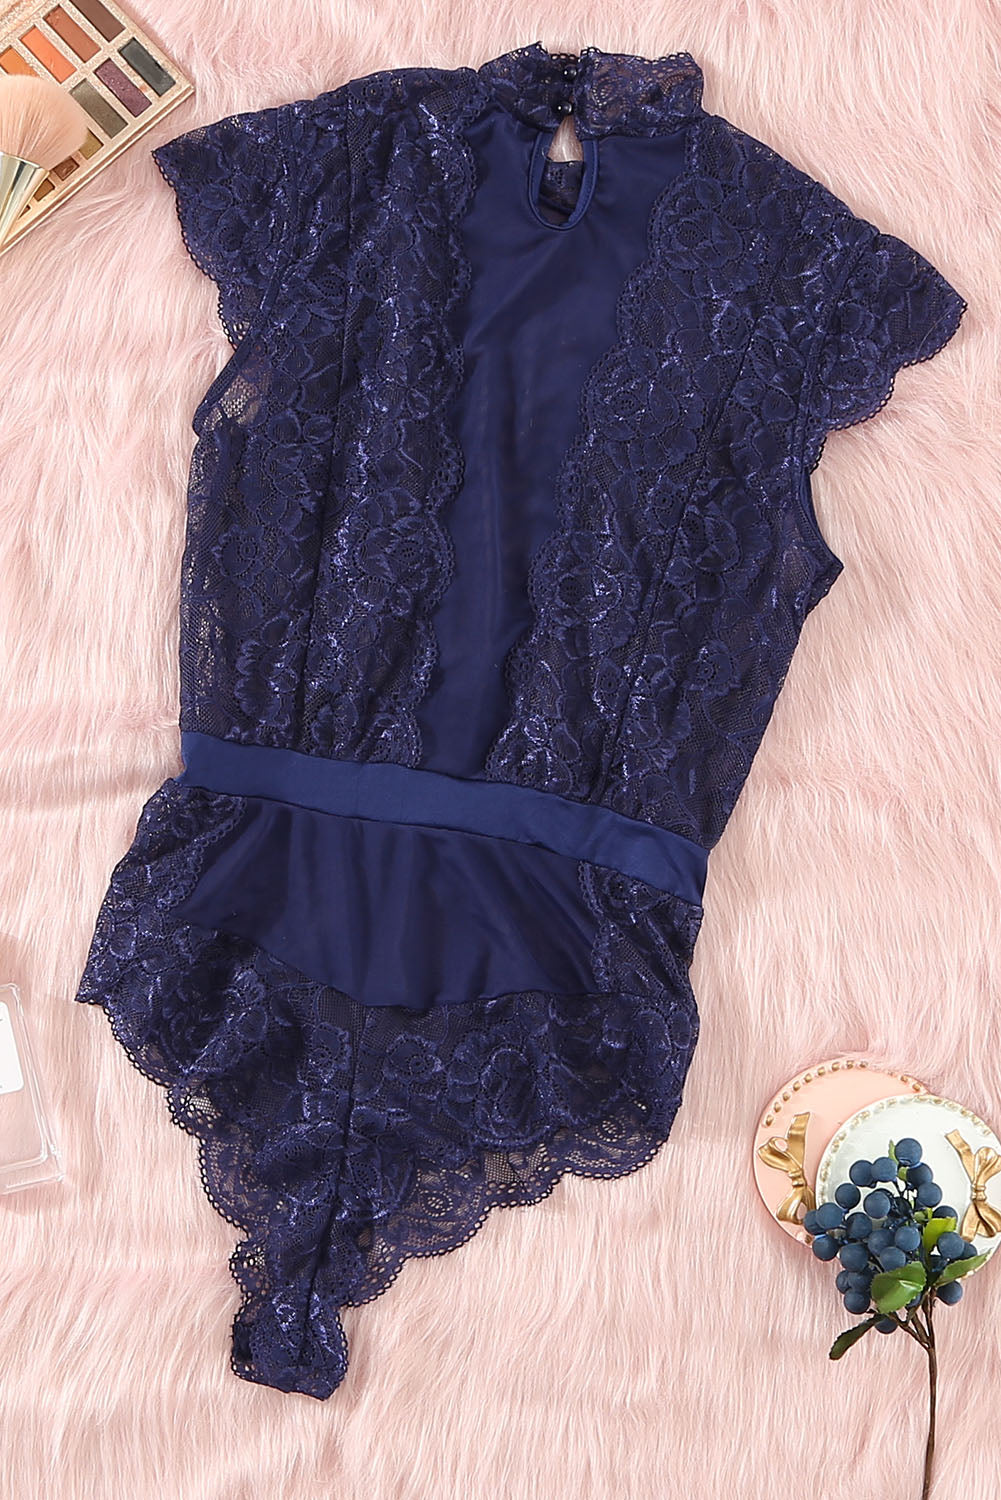 Chic Blue Lace Tulle High Neck Bodysuit